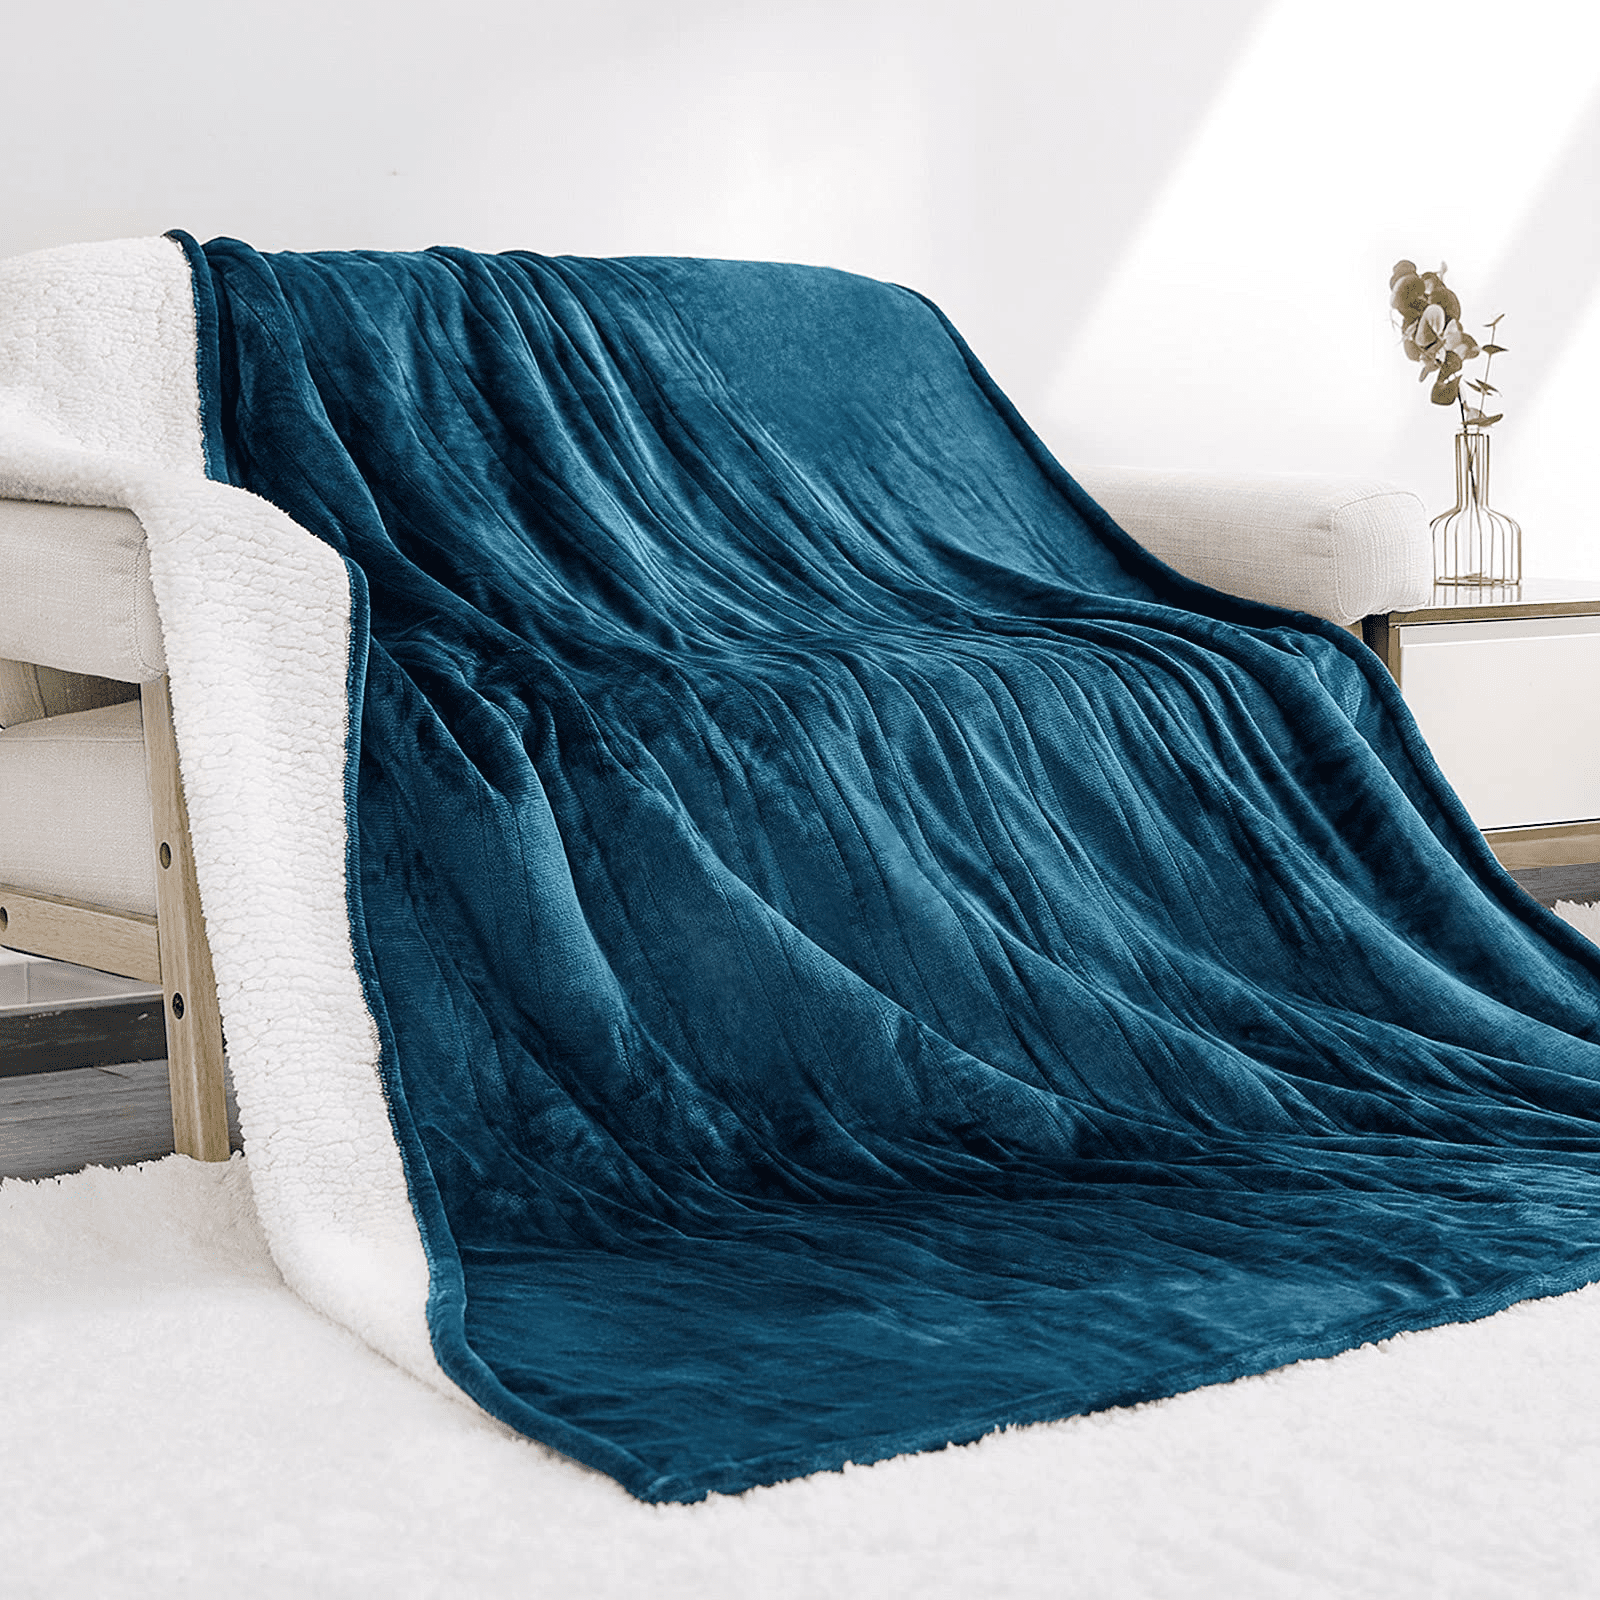 Blanket Weed Leaf Snowflake Flannel Fleece Throw Blankets for Baby Kids Men Women,Soft Warm Blankets Queen Size and Throws for Couch Bed Travel Sofa-5040inches